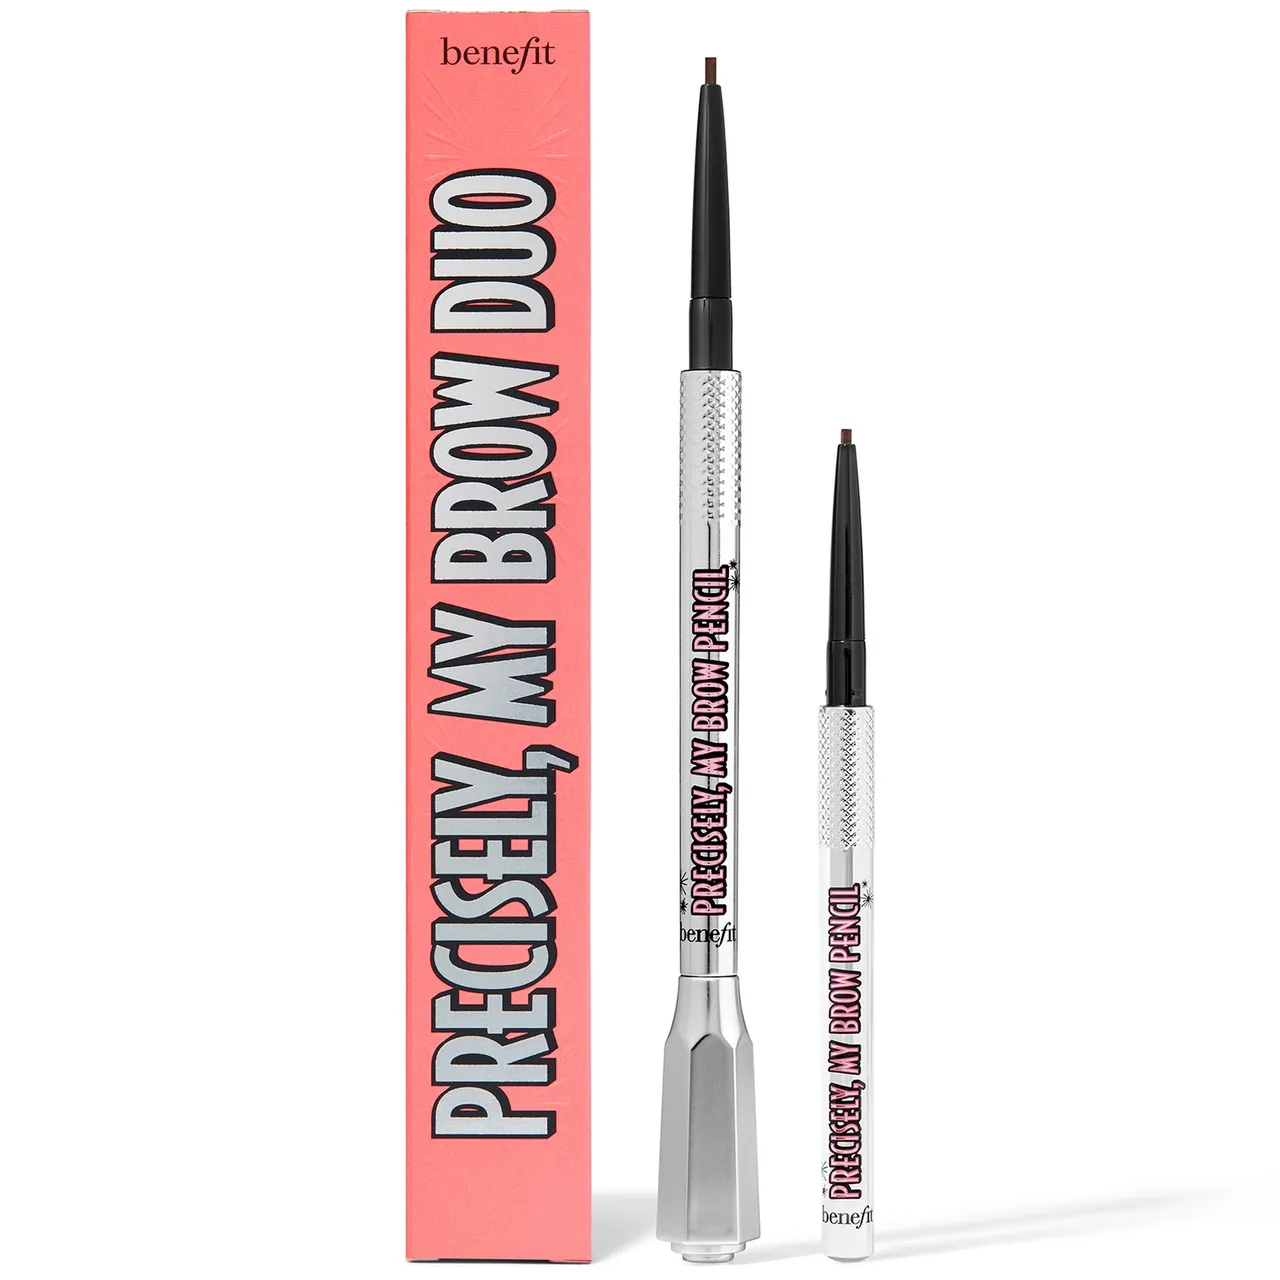 benefit The Precise Pair Precisely My Brow Pencil Duo Set (Various Shades) (Worth £40.50) - 4 Warm Deep Brown